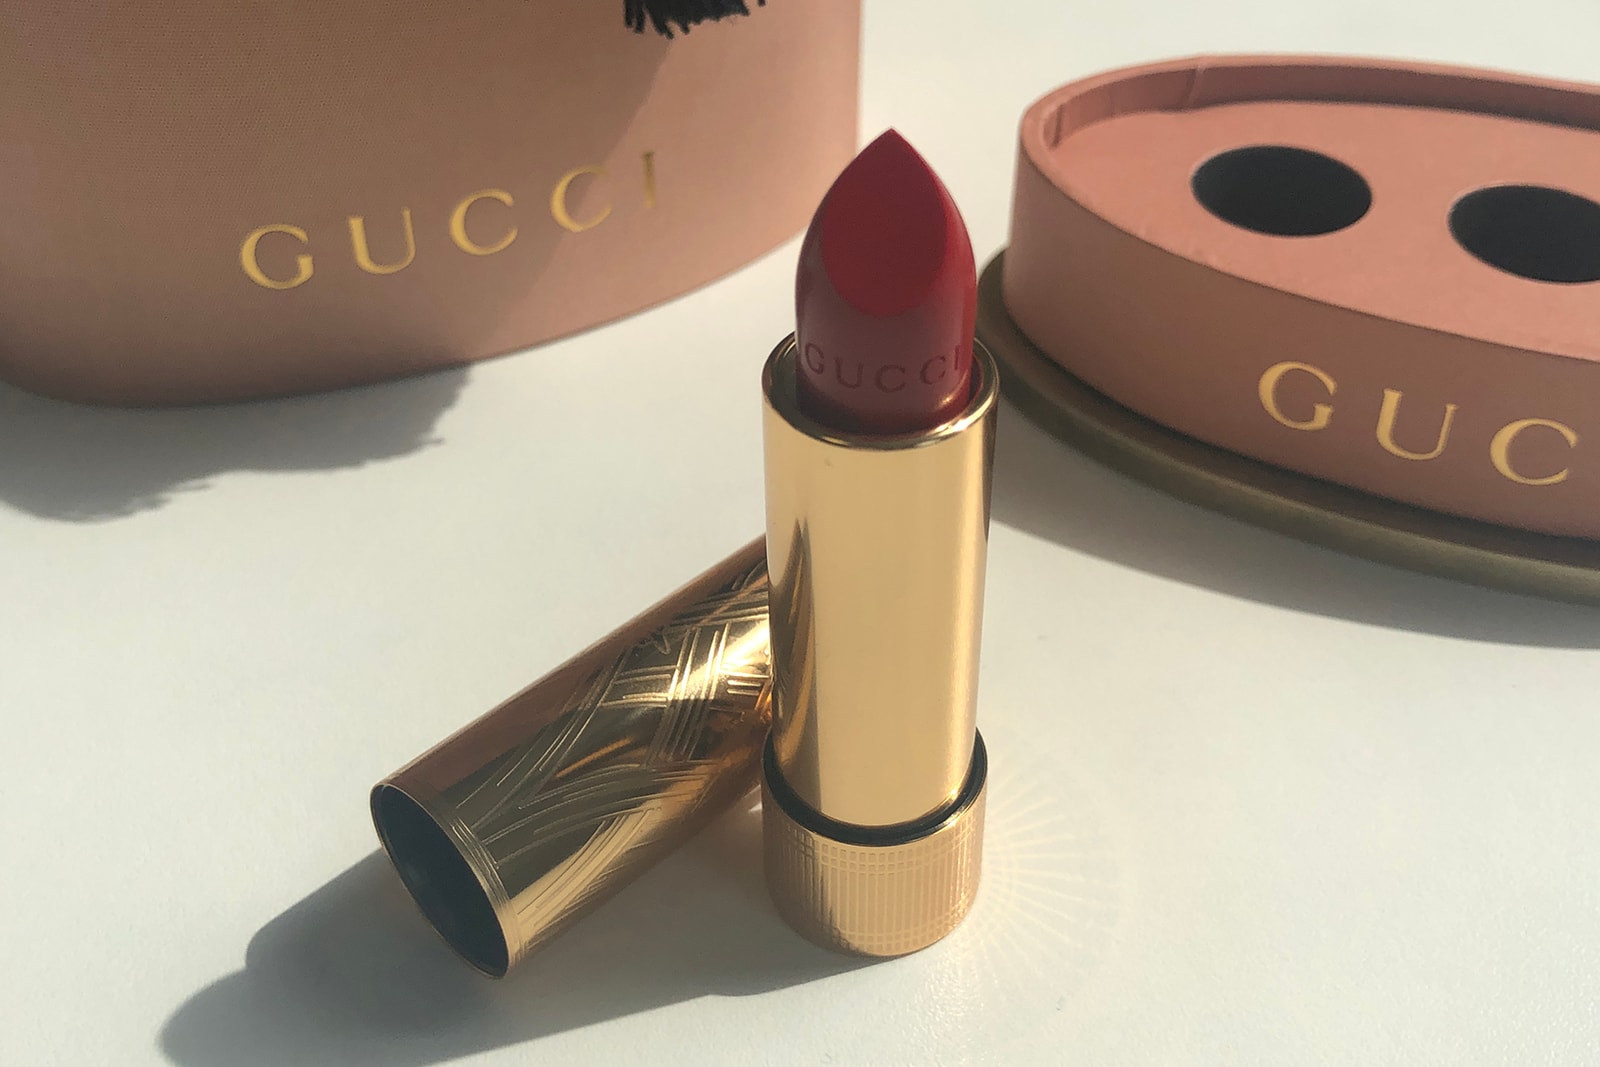 Gucci Beauty Lipstick Satin Voile Review | HYPEBAE